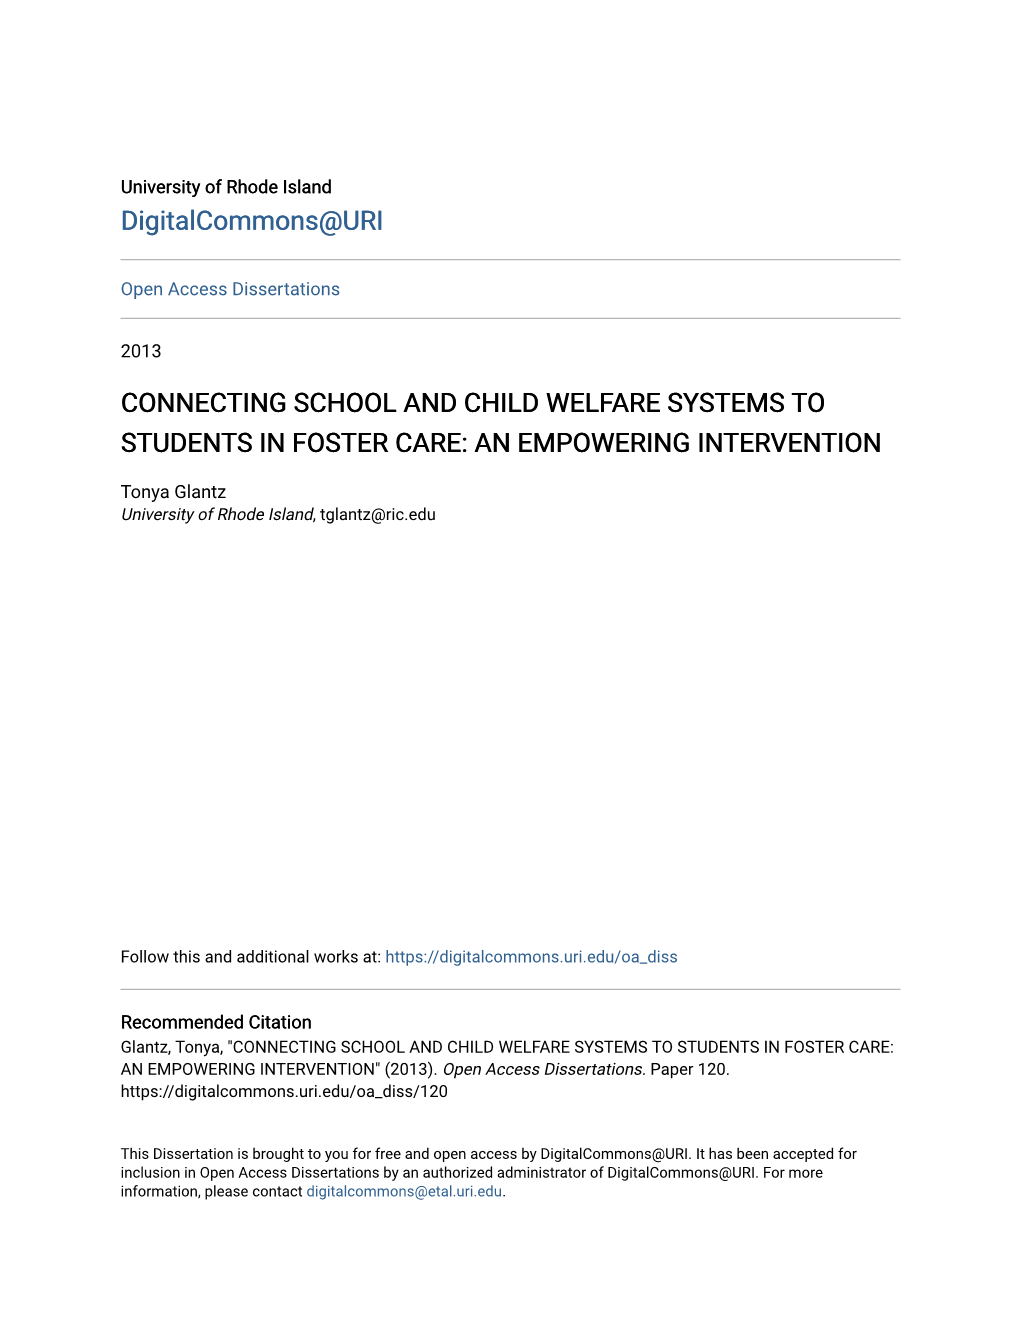 Connecting School and Child Welfare Systems to Students in Foster Care: an Empowering Intervention